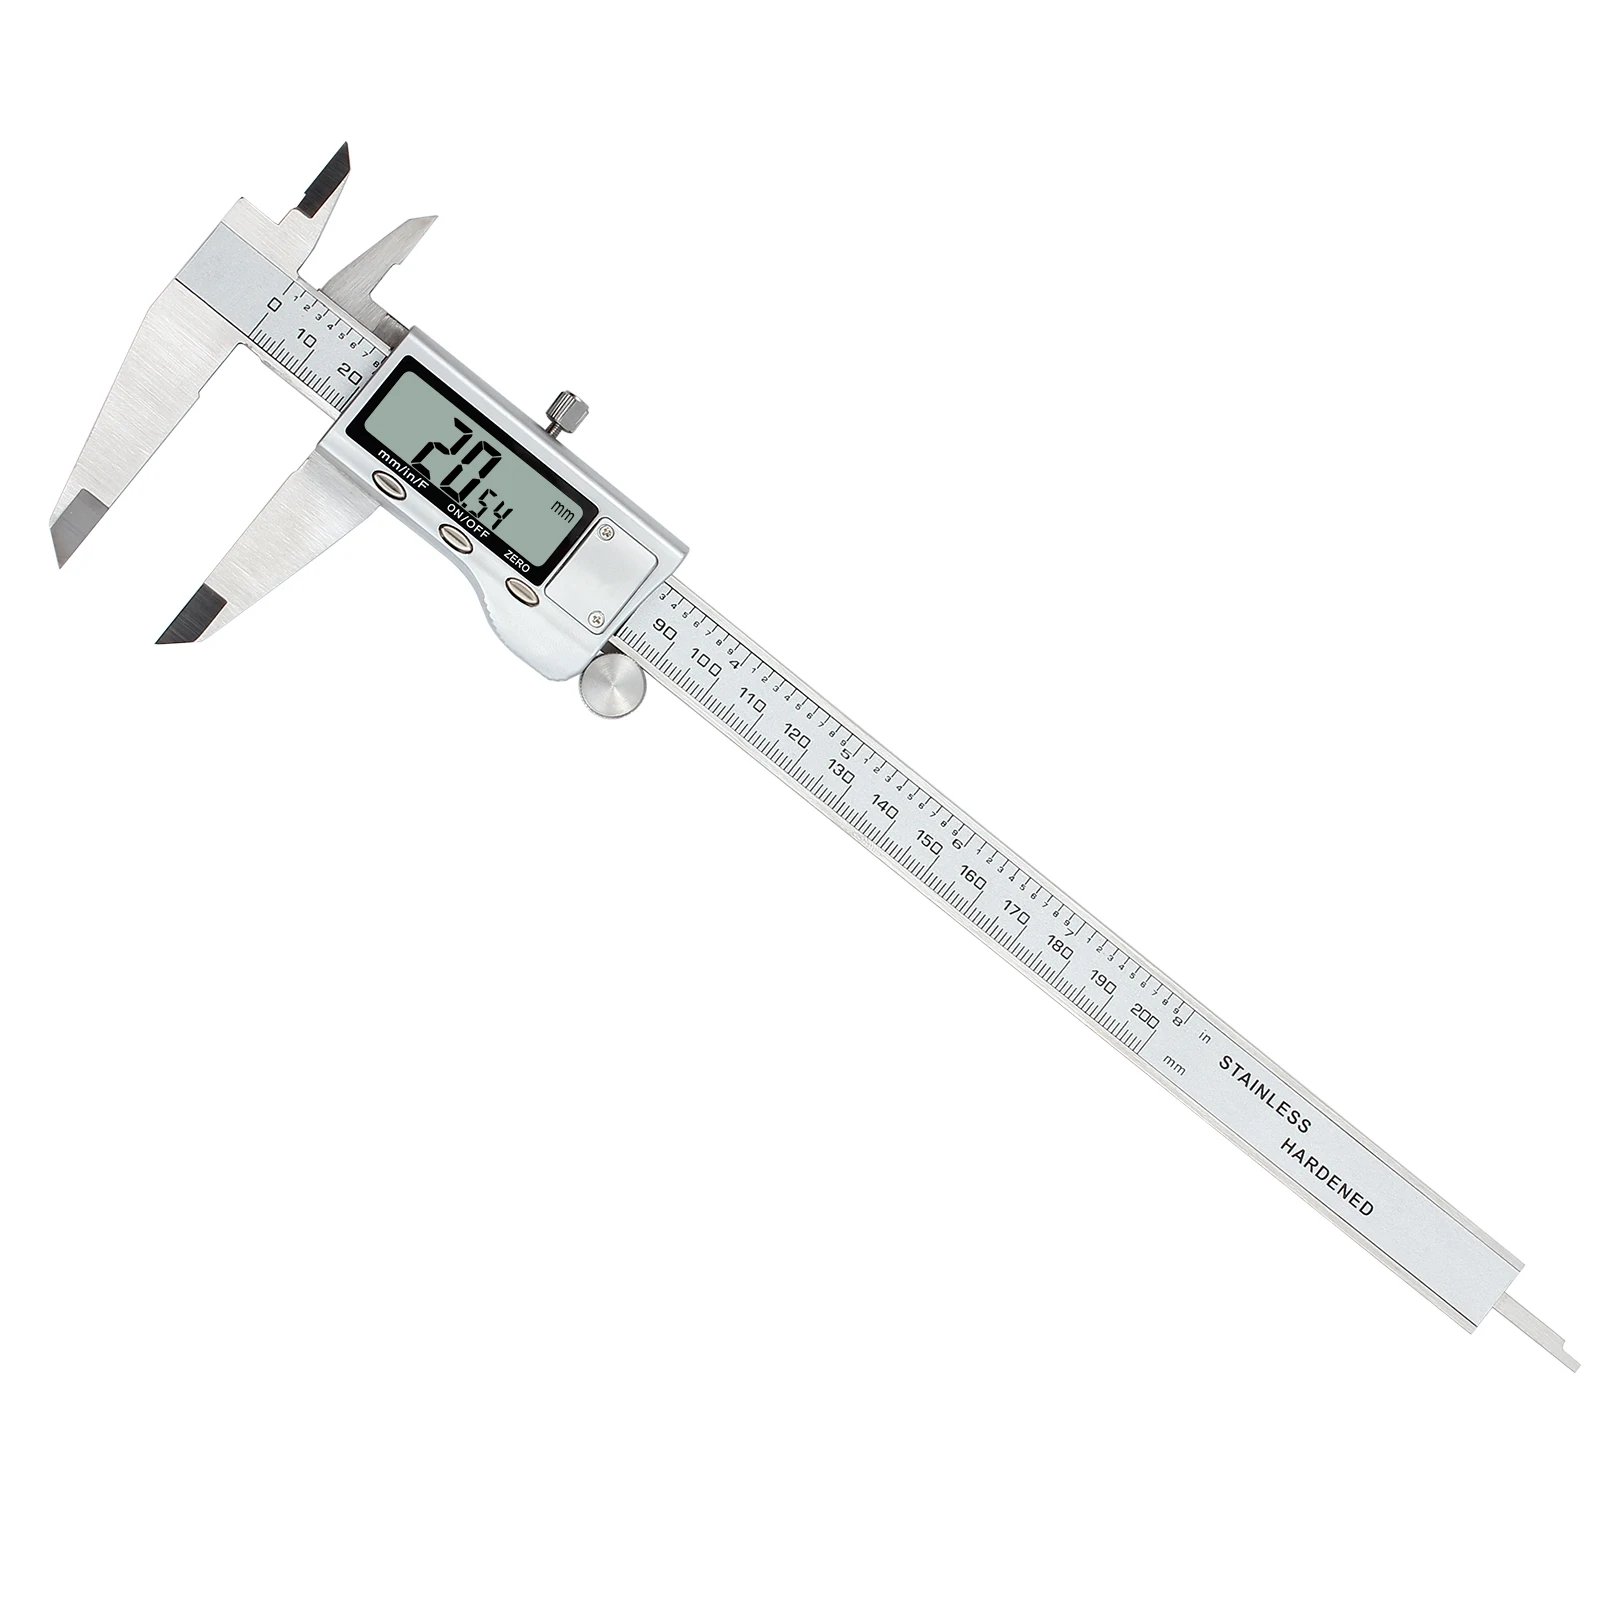 

Proster Digital Vernier Caliper 200 mm / 8 Inch Stainless Steel Electronic Ruler Fractions/Inch/Metric Conversion Trammel Tool